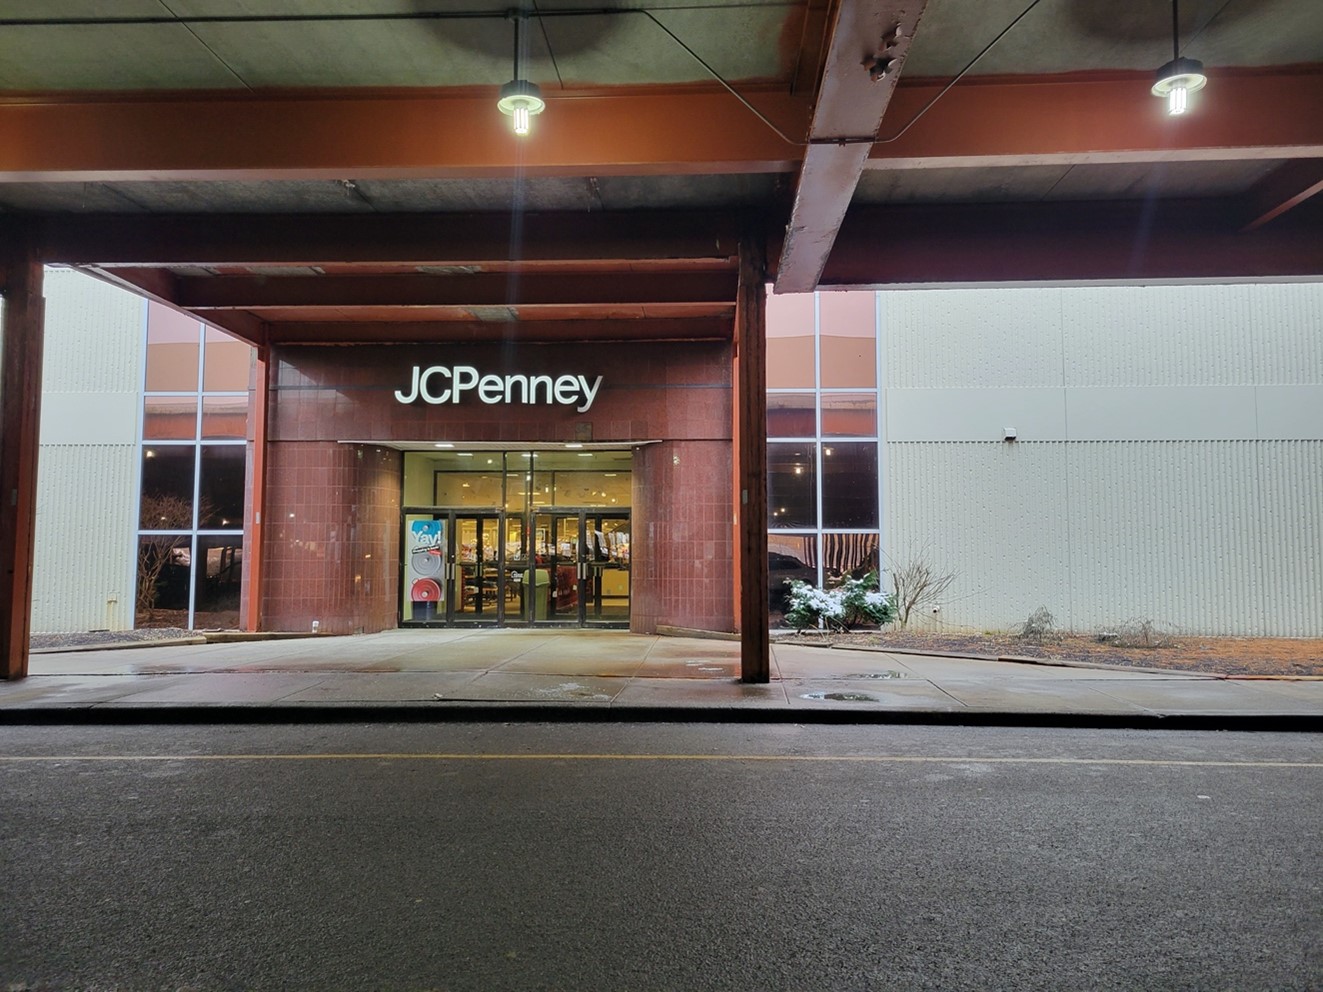 View of JCPenney entrance.